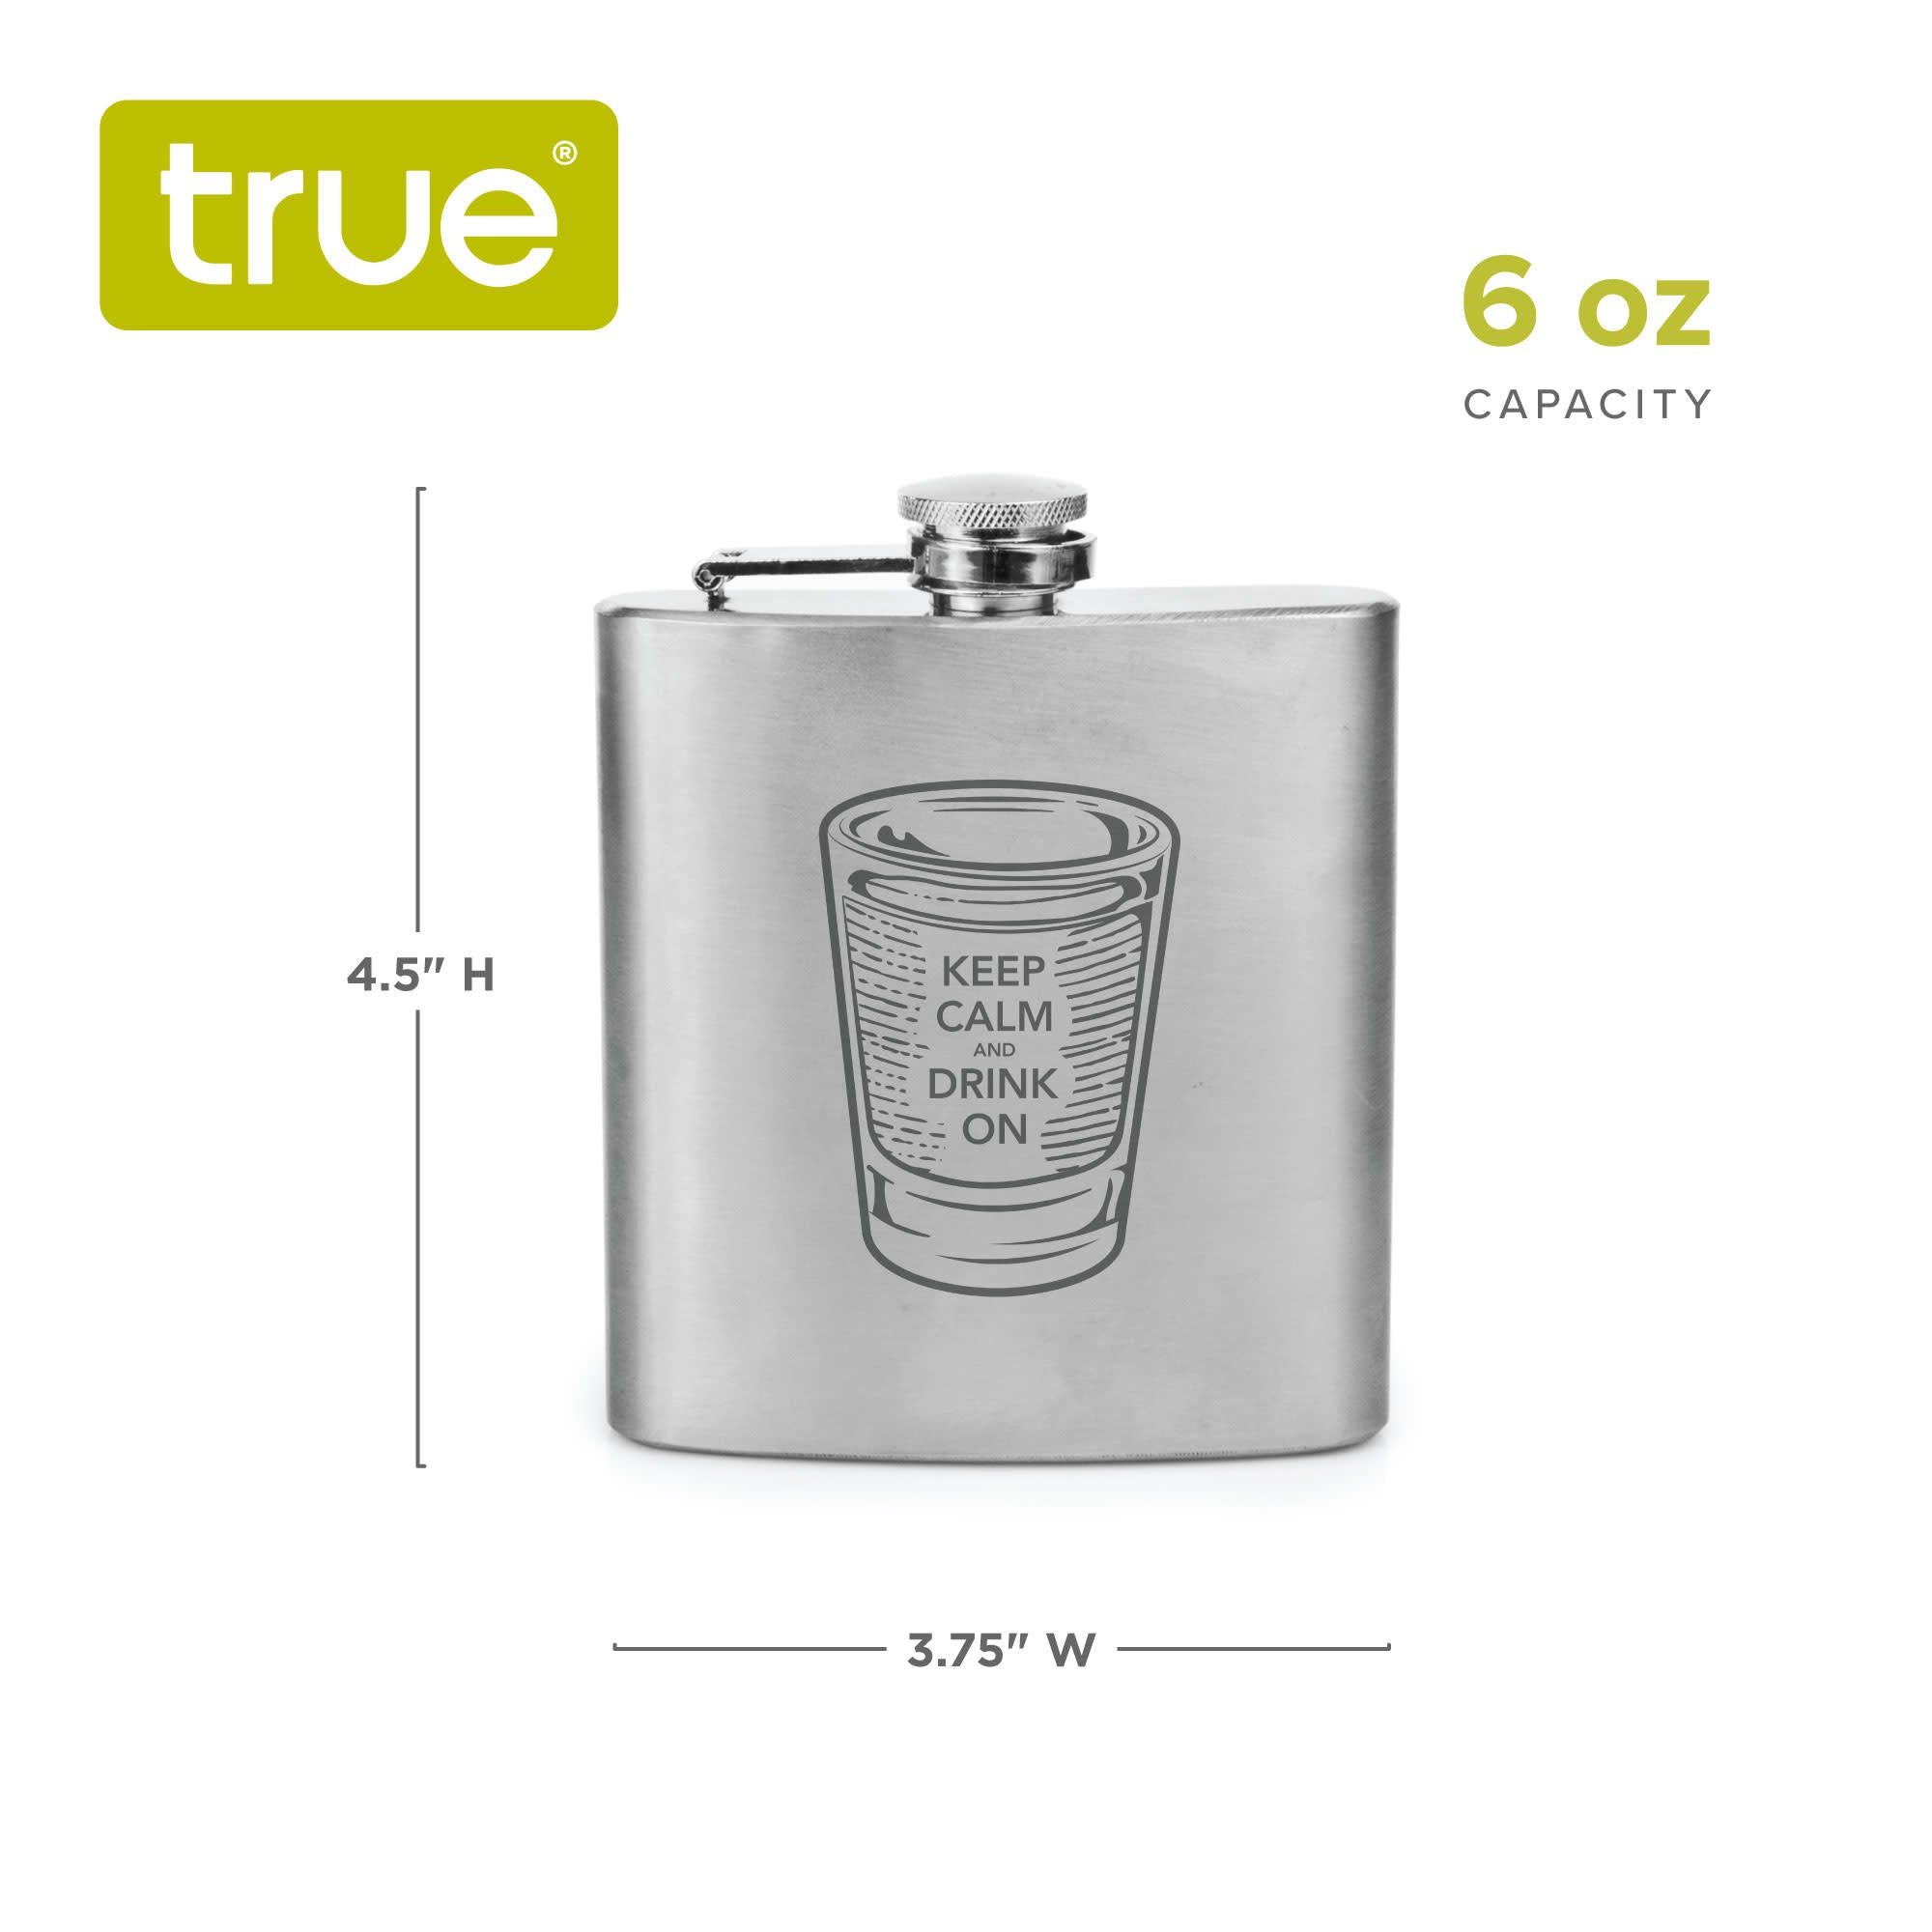 Keep Calm Stainless Steel Flask by True (11171)